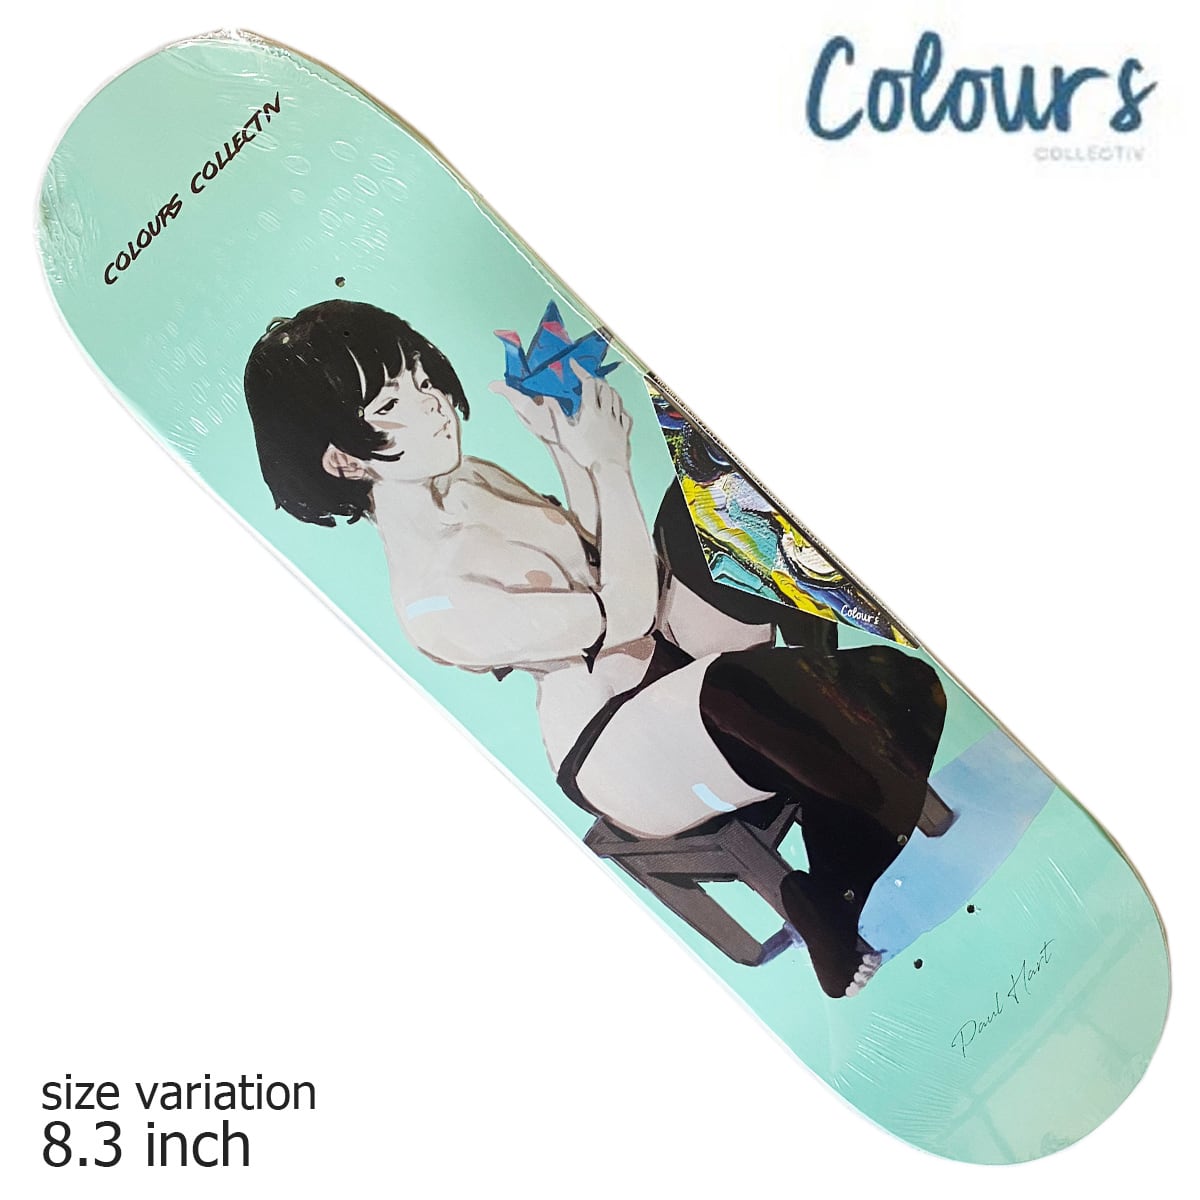 COLOURS COLLECTIVE Panda x Paul Hart 8.3 inch カラーズコレクティブ